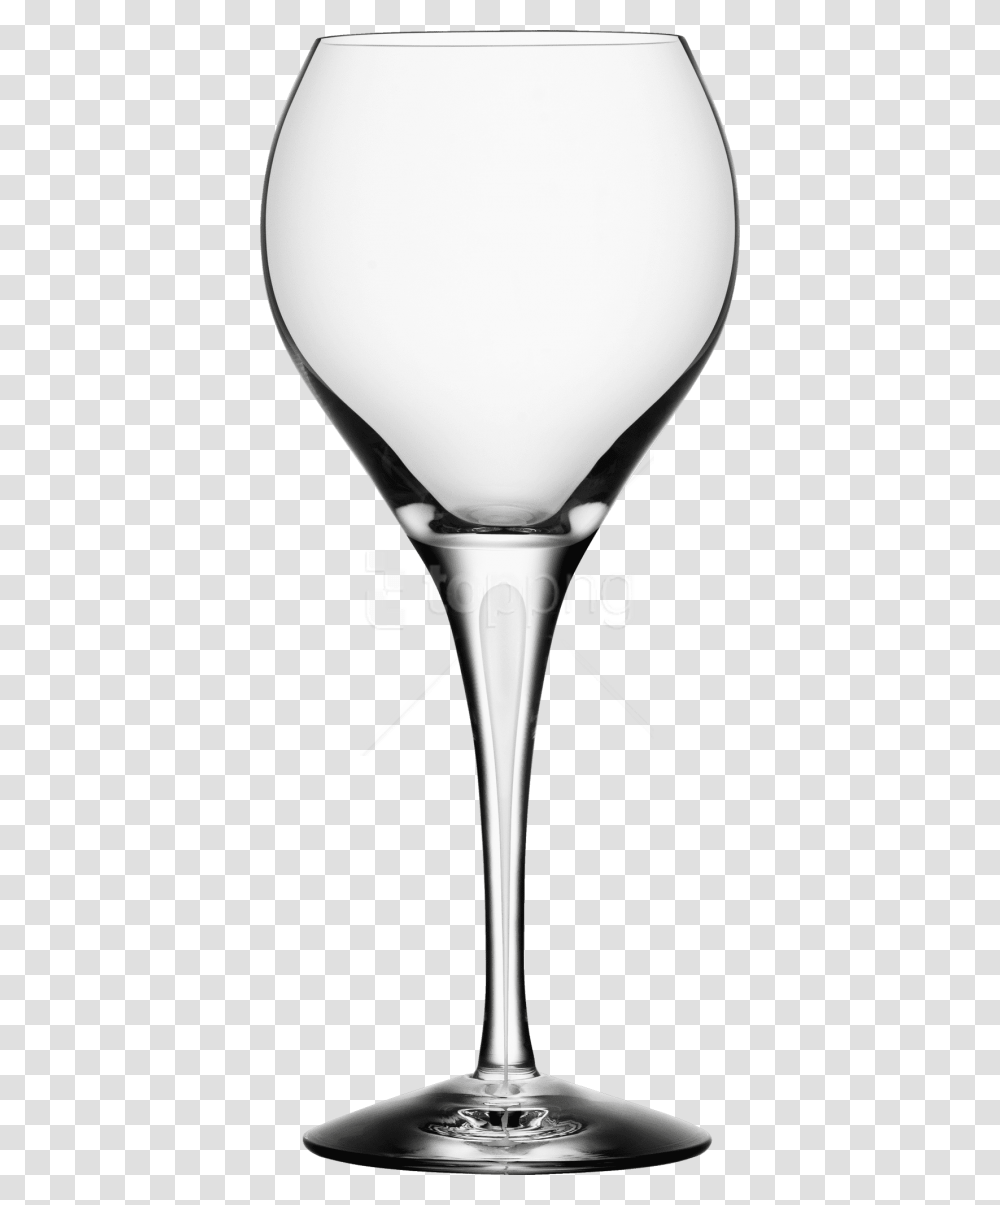 Free Wine Glass Images Background Champagne Glass Empty, Lamp, Goblet, Alcohol, Beverage Transparent Png